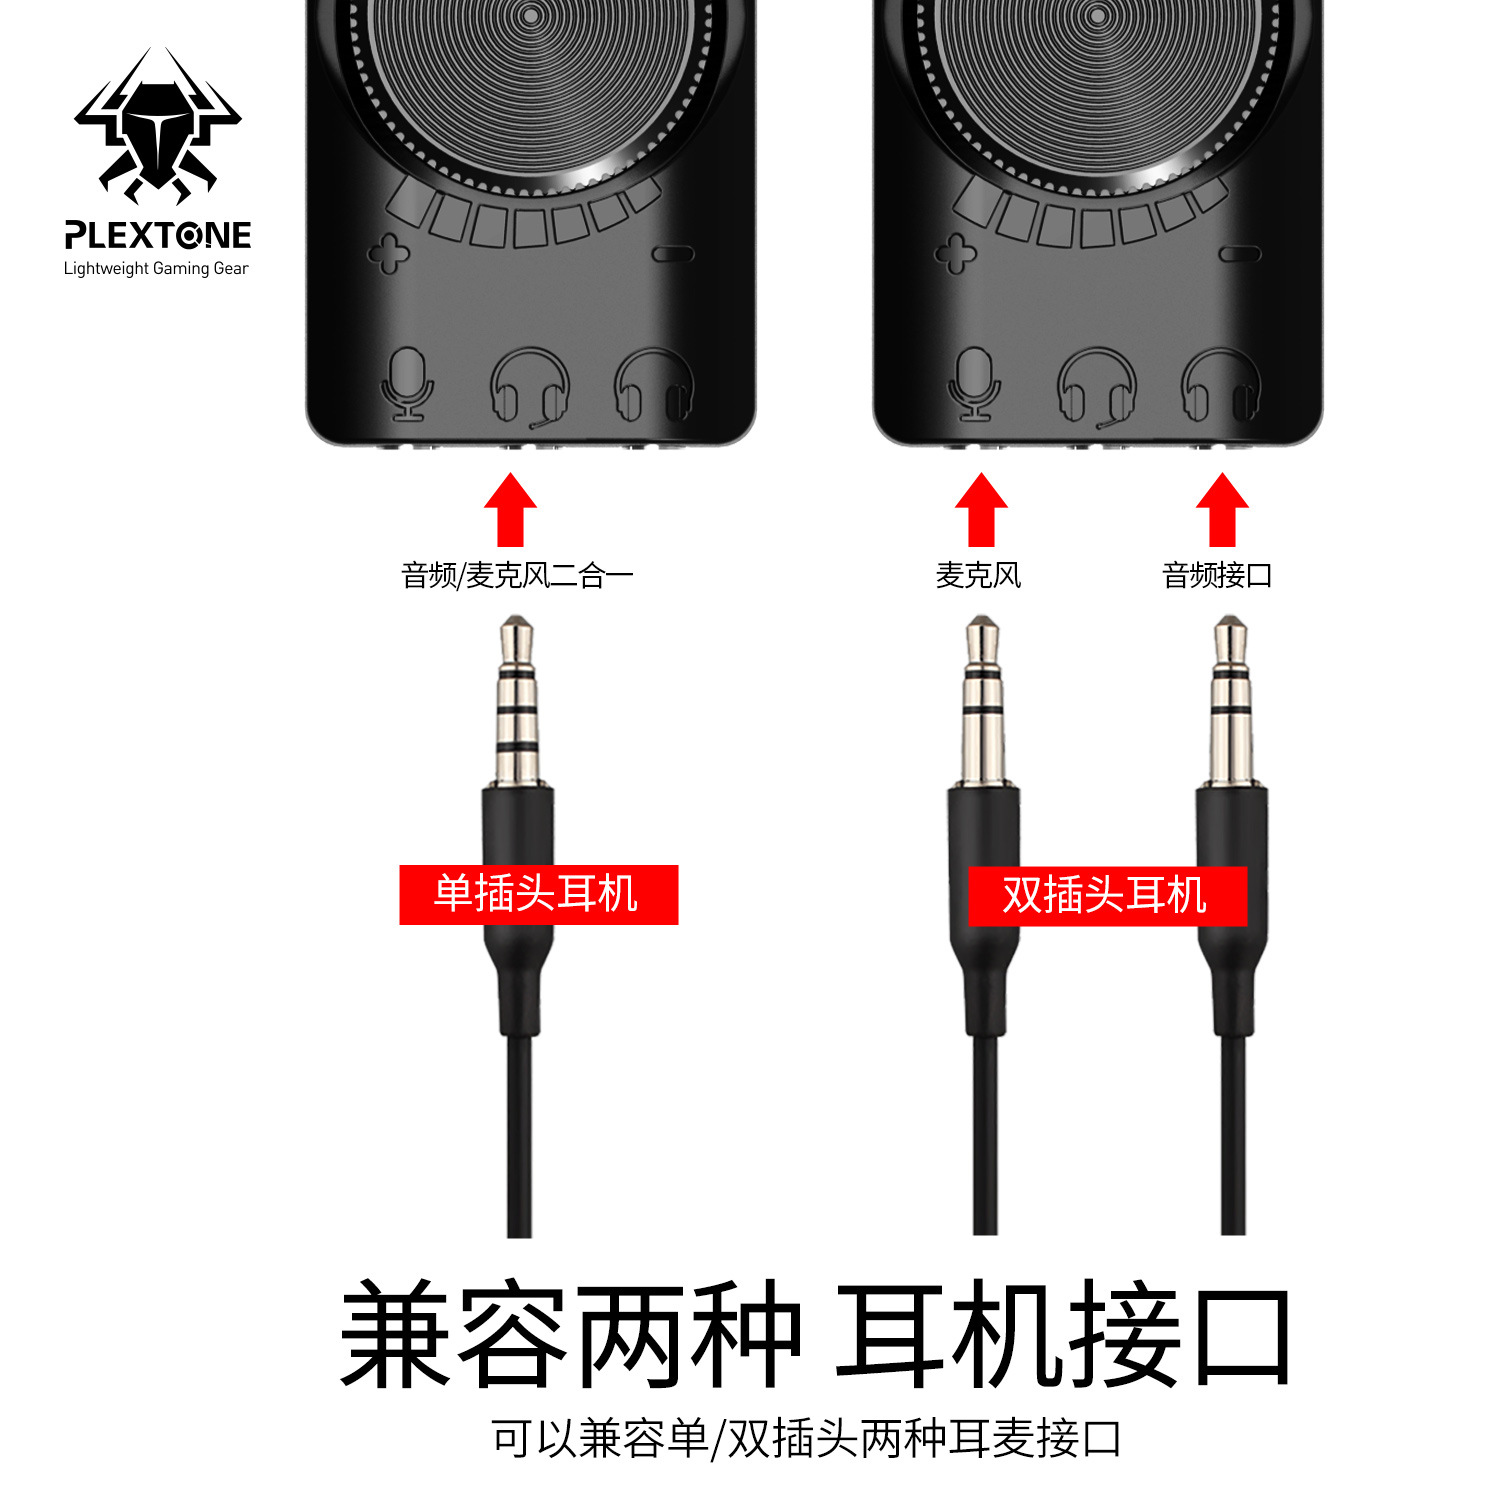 Cross-border Puji GS3 7.1 channel audio effect sound card USB external computer mobile phone sound card Chicken game sound card